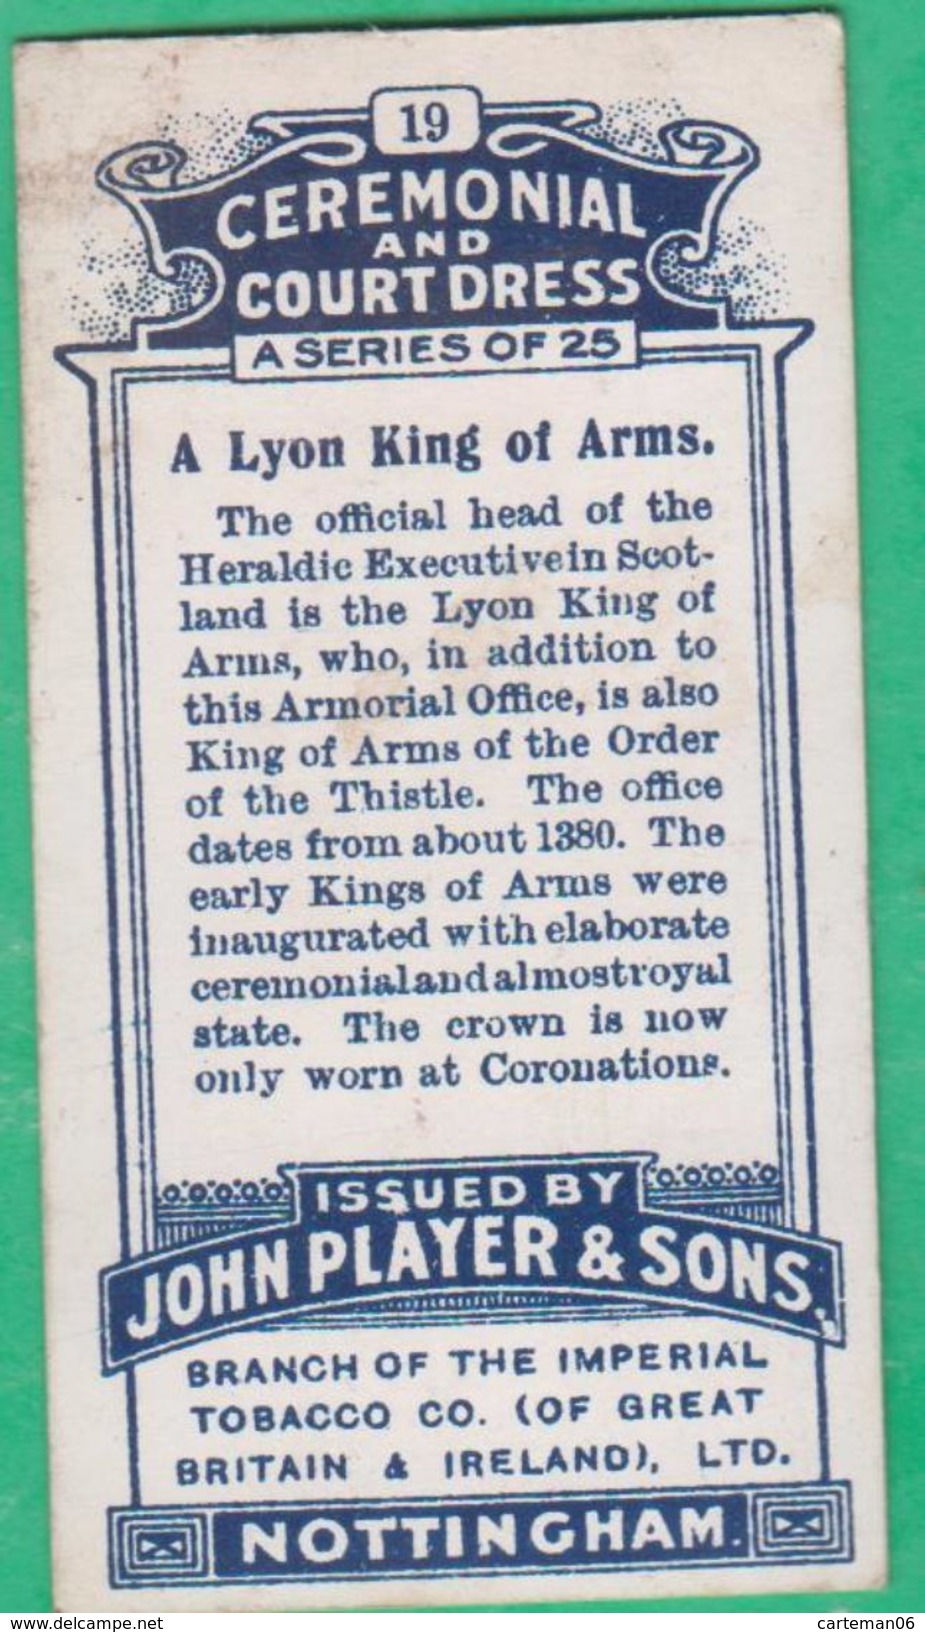 Chromo John Player & Sons, Player's Cigarettes, Ceremonial And Court Dress - A Lyon King Of Arms N°19 - Player's